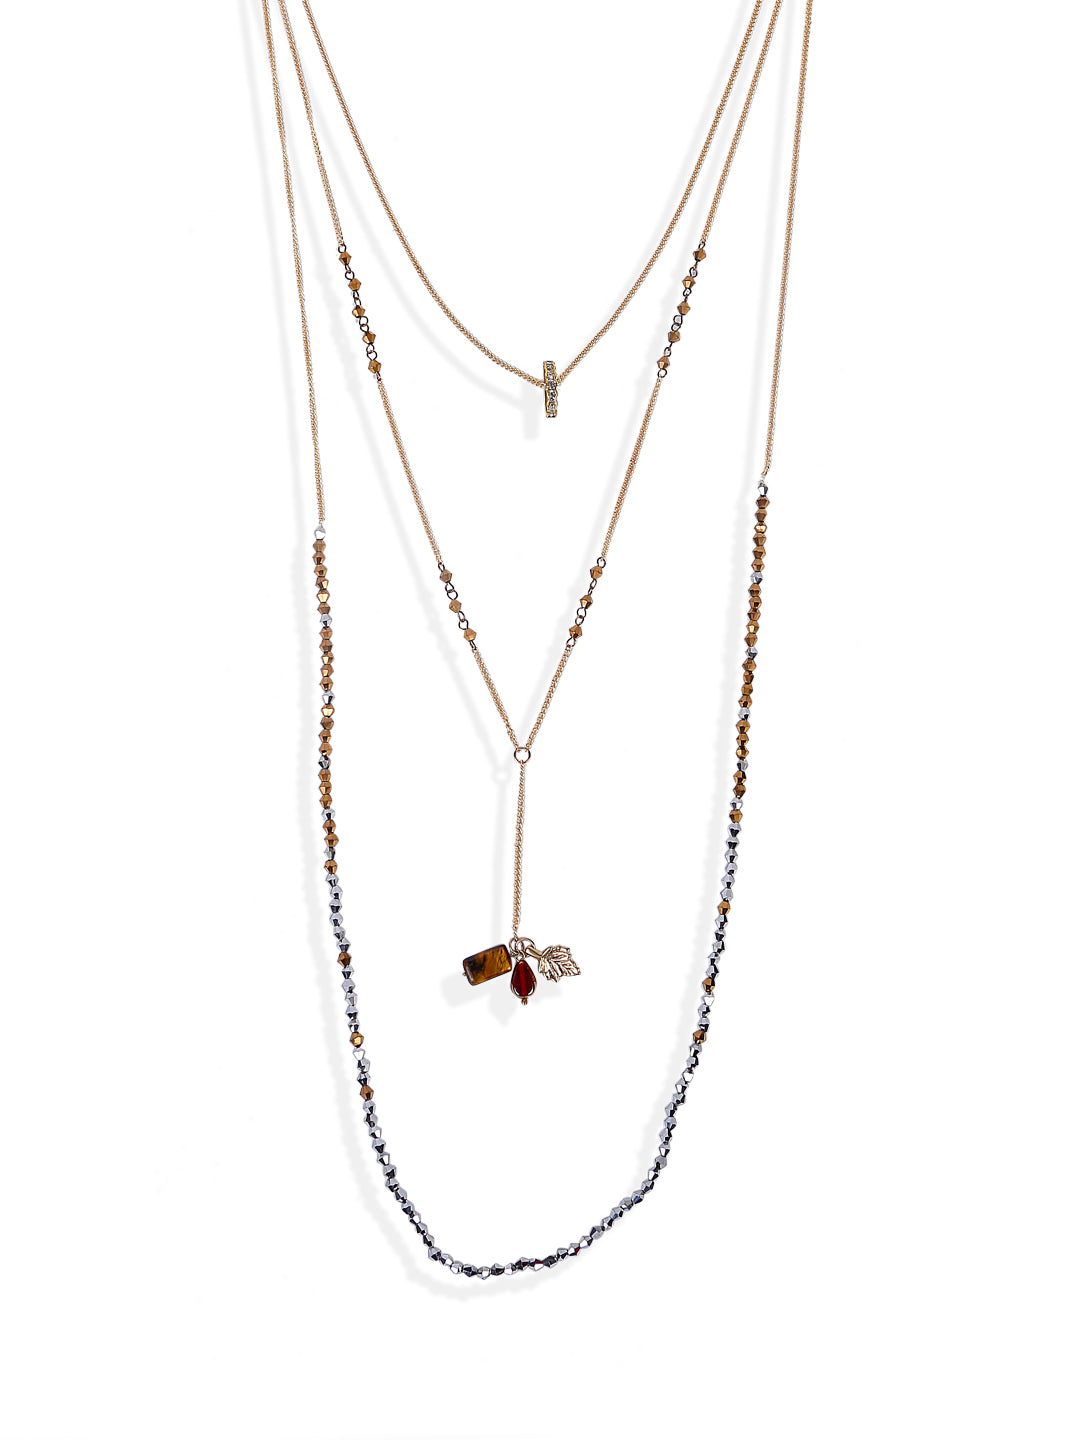 Blueberry gold plated beaded chain necklace